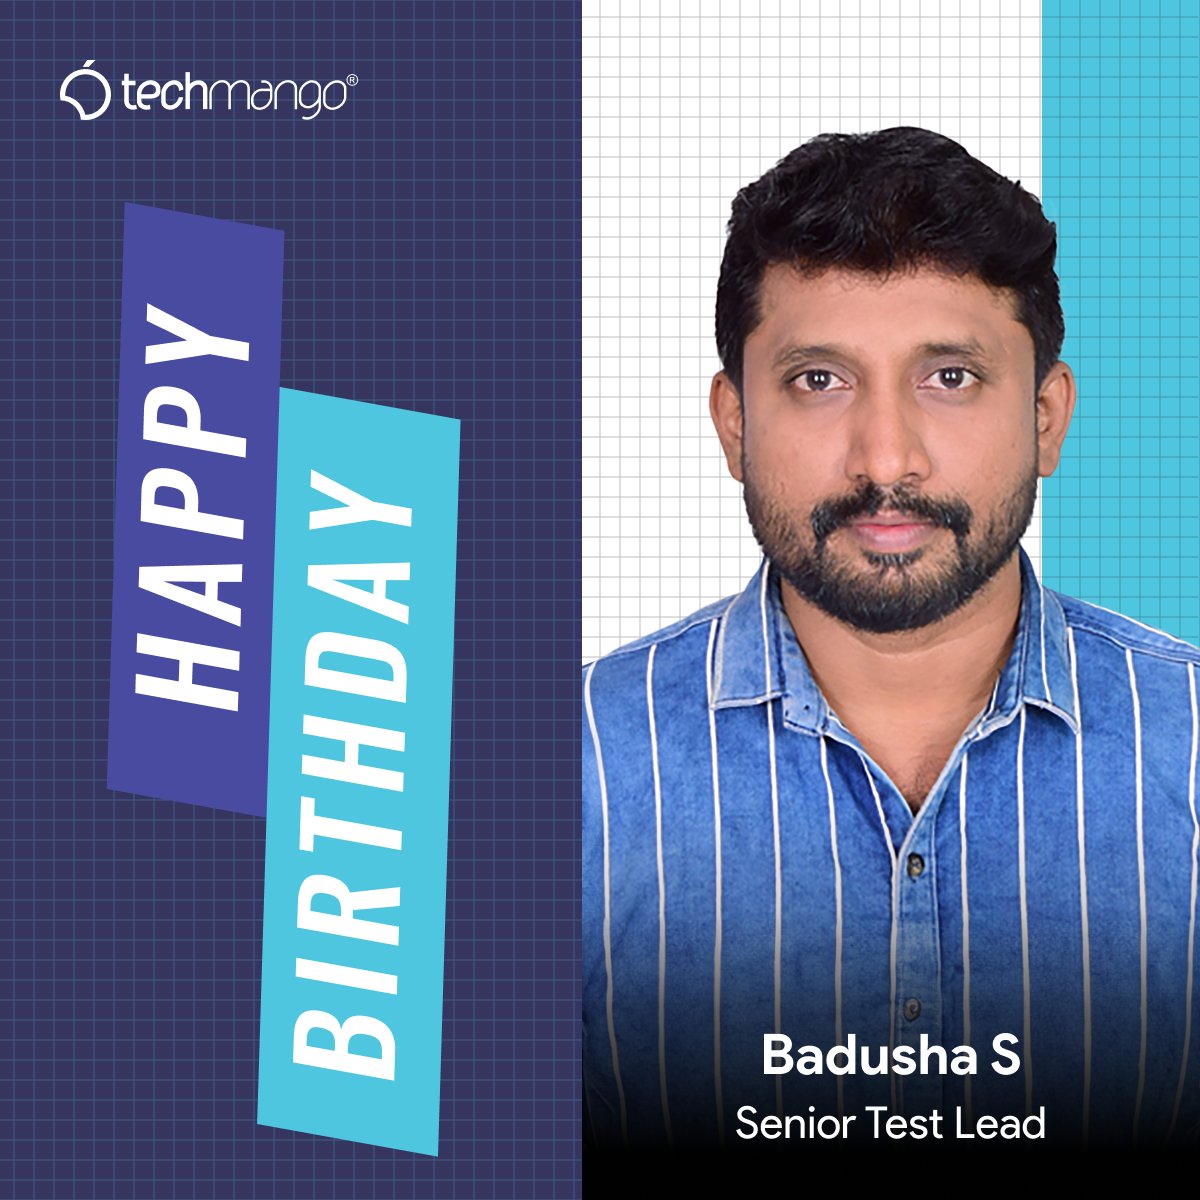 Techmango Wishes Happy Birthday to Badusha Cheers to another fantastic year ahead! May this birthday be the start of your greatest, most wonderful journey yet. Have a fantastic day! #happybirthday #birthdaywishes #birthdaycelebration #birthdayparty #birthdaycheers